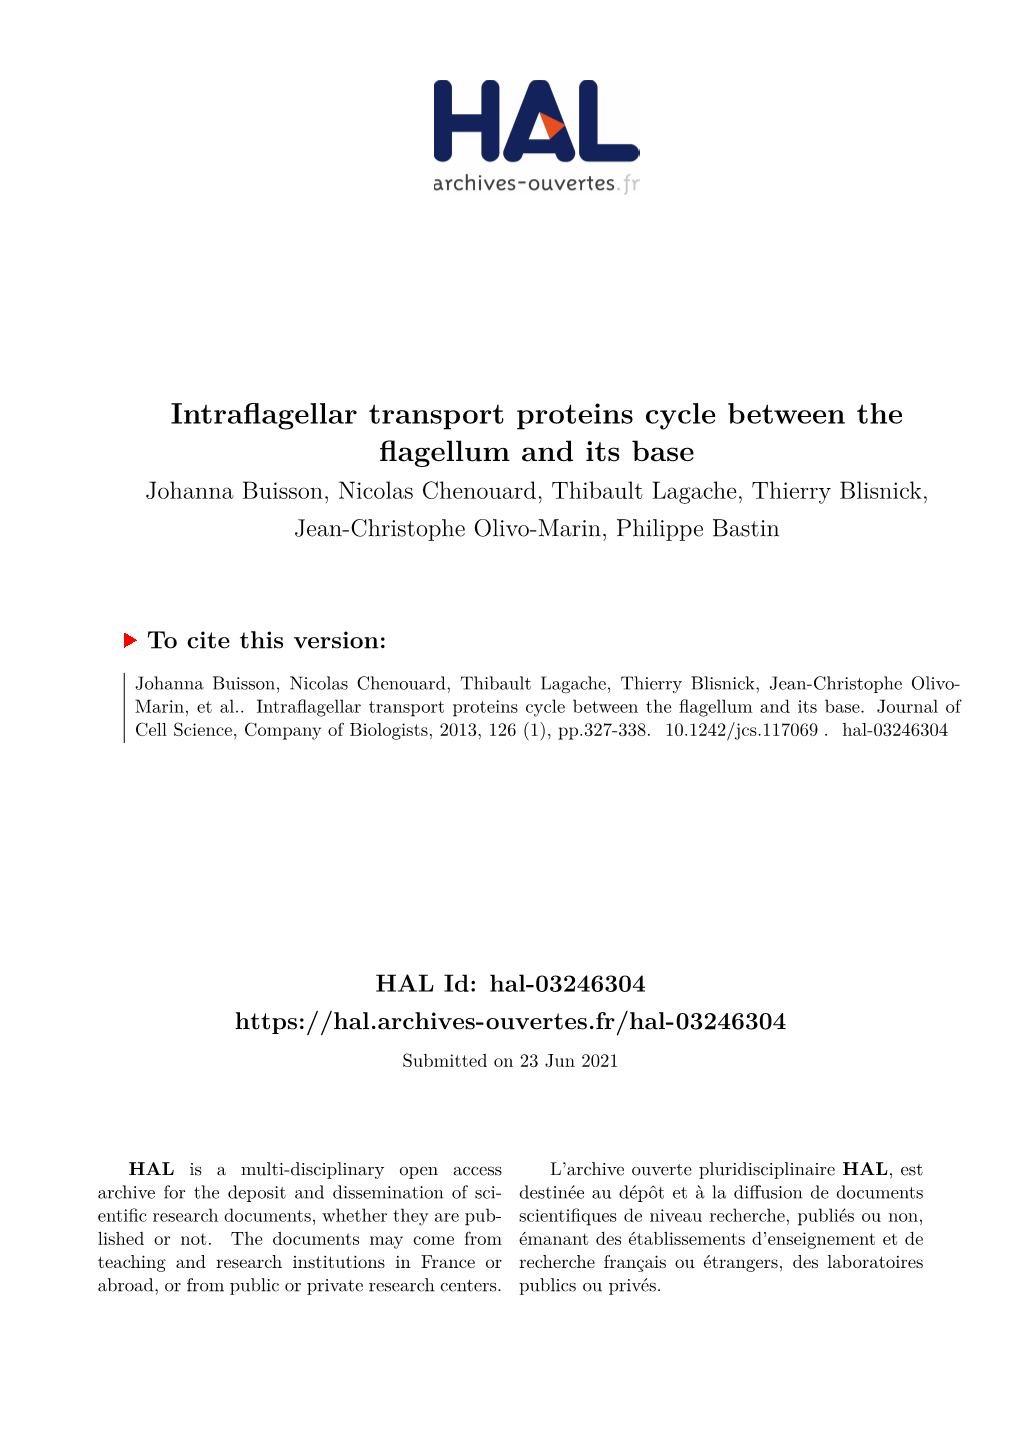 Intraflagellar Transport Proteins Cycle Between the Flagellum and Its Base